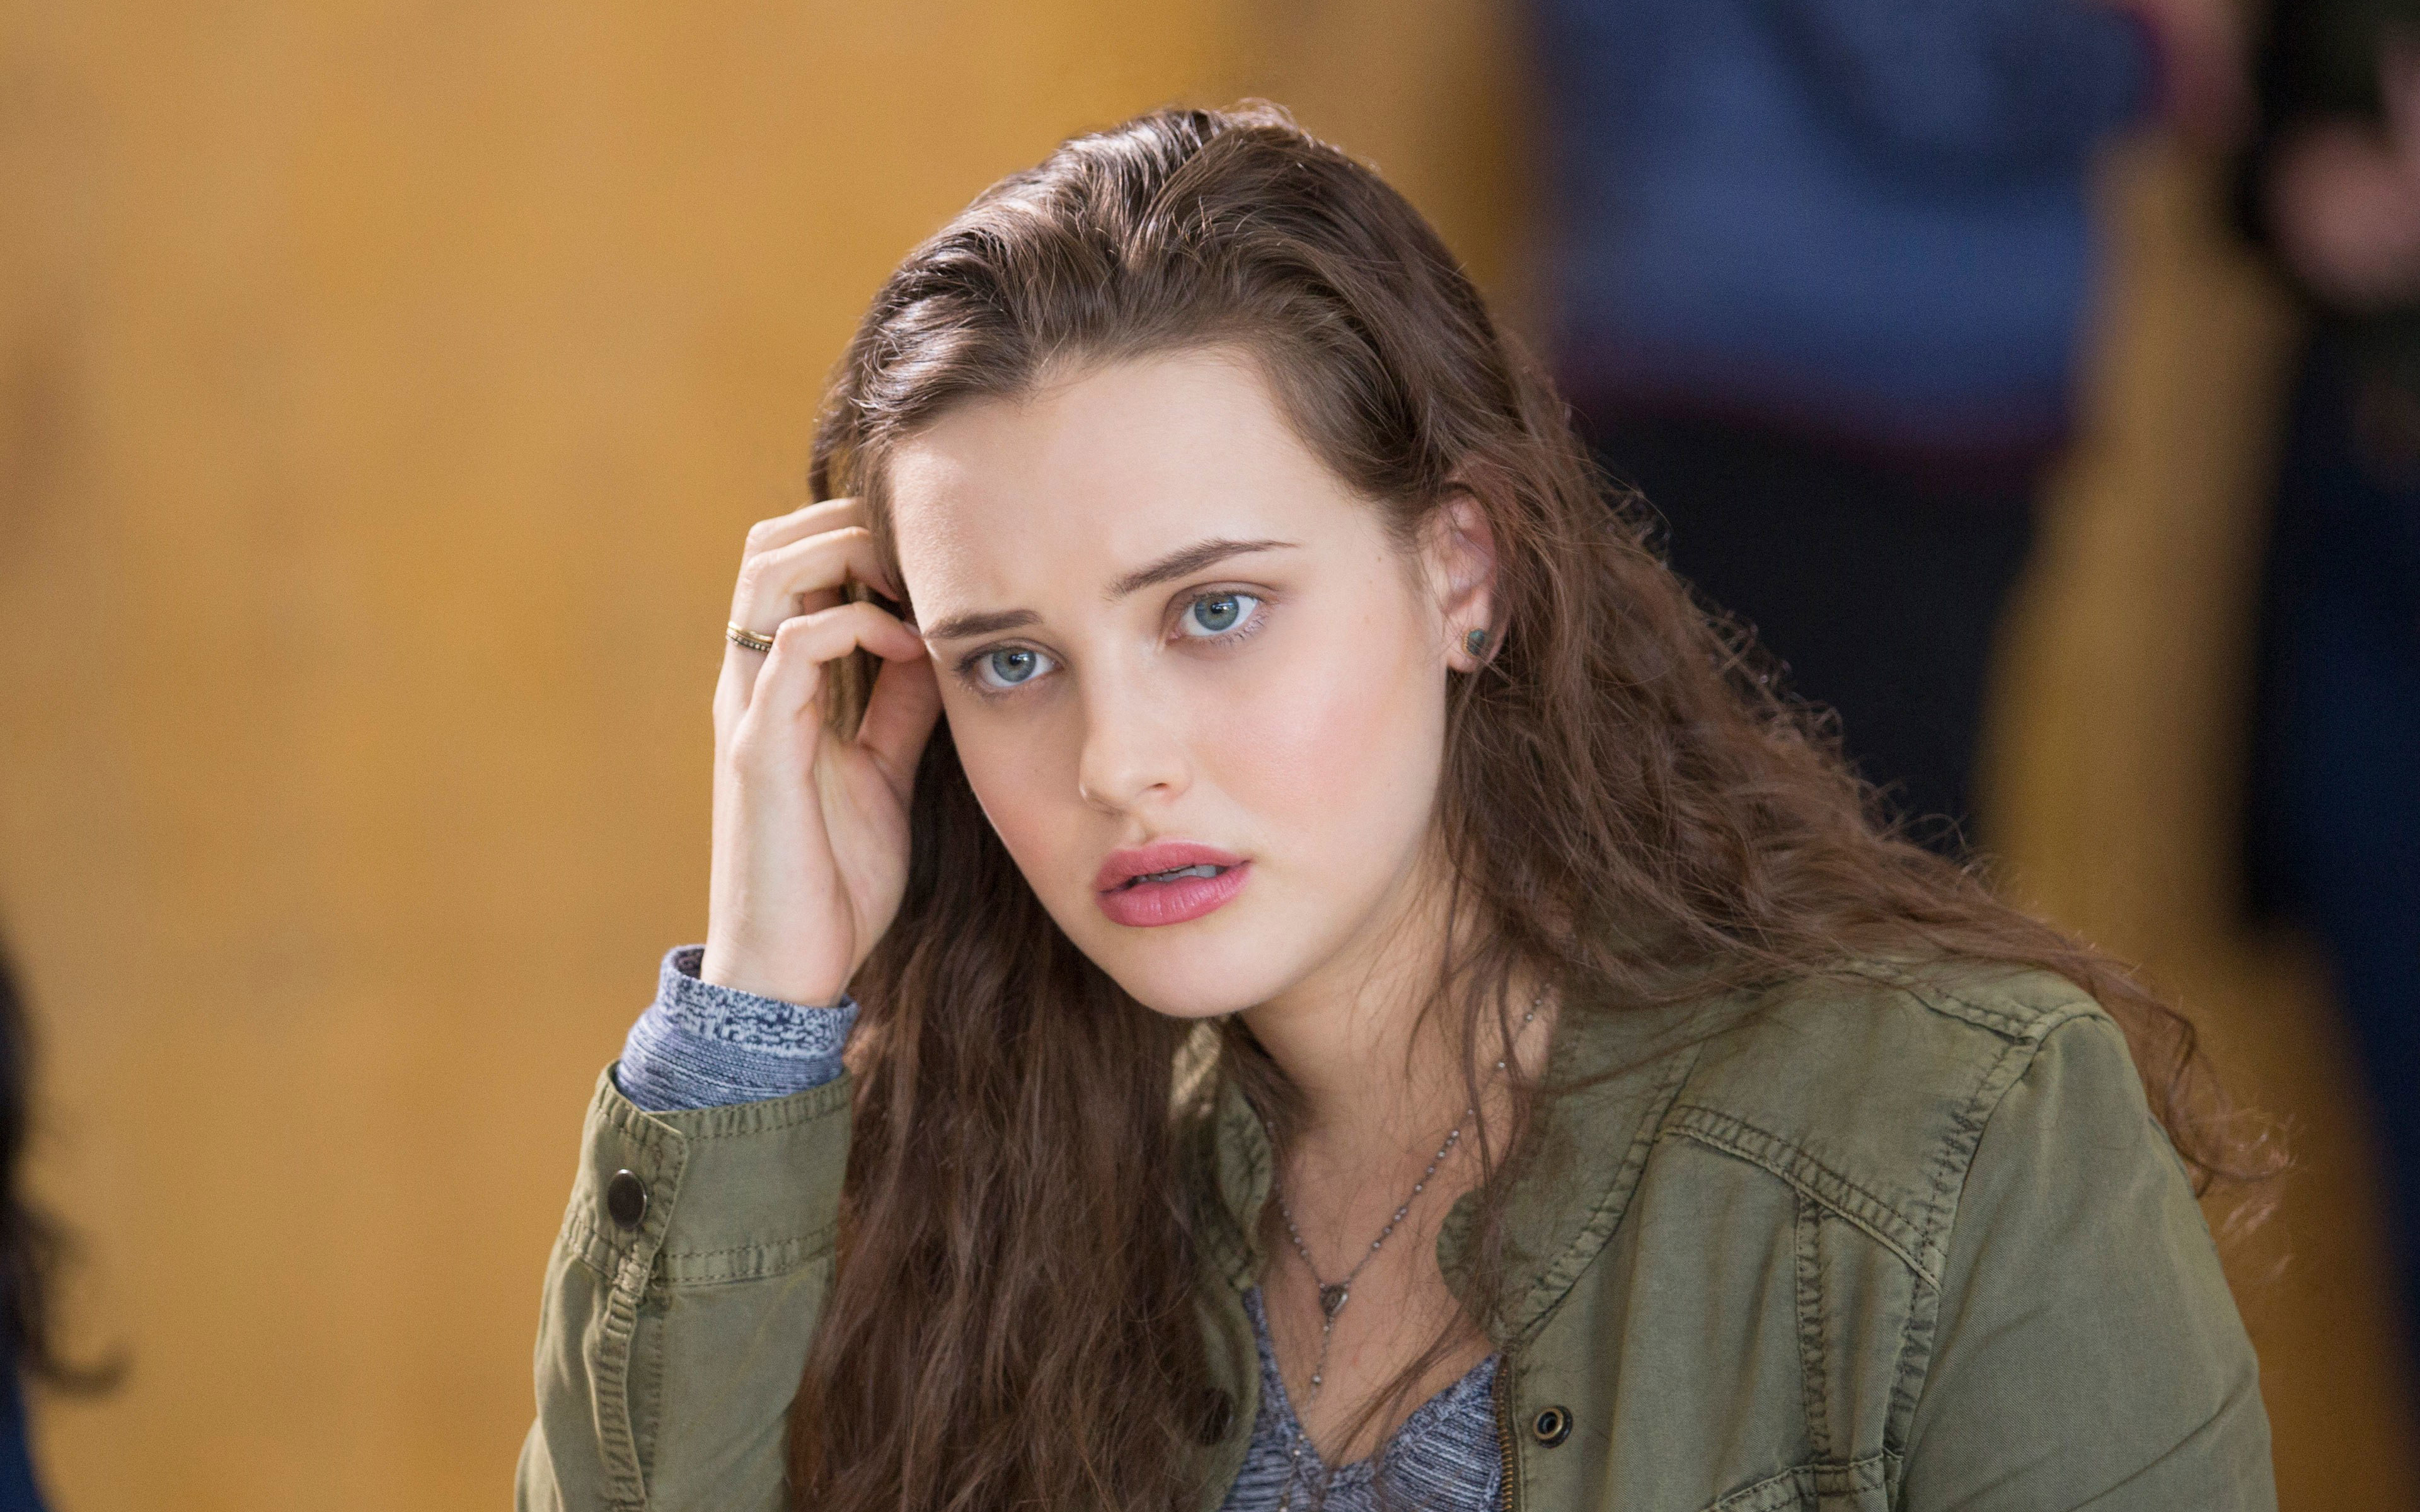 Download 3840x2400 Wallpaper Actress, 13 Reasons Why, Tv Show, Katherine  Langford, 4k, 4 K, Ultra Hd 16:10, Widescreen, 3840x2400 Hd Image,  Background, 16916